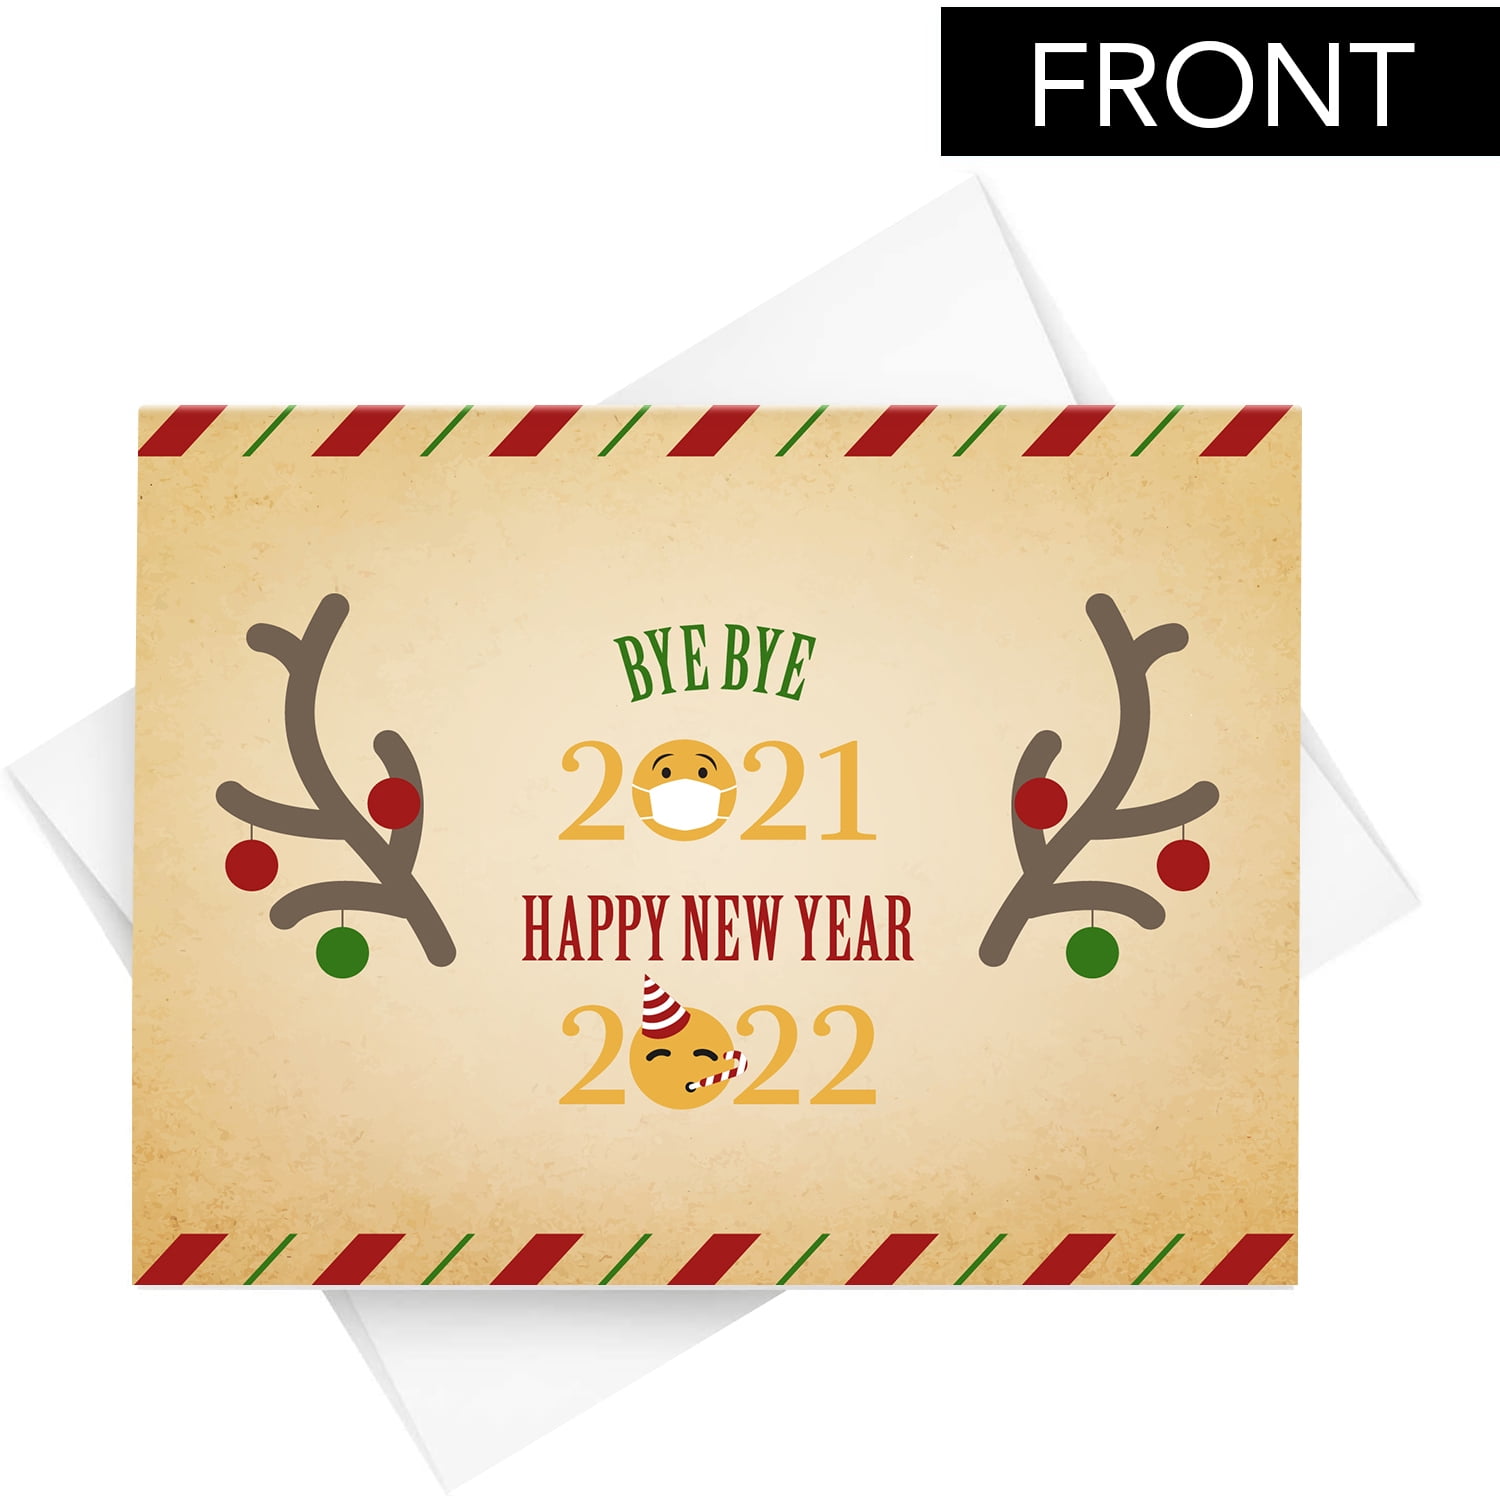 with Envelopes Merry Christmas Greeting Card Winter Holiday Xmas Cards Box Set Vertical Orientation Printed Front Only Assorted 4.25 X 5.5, Pack of 500 